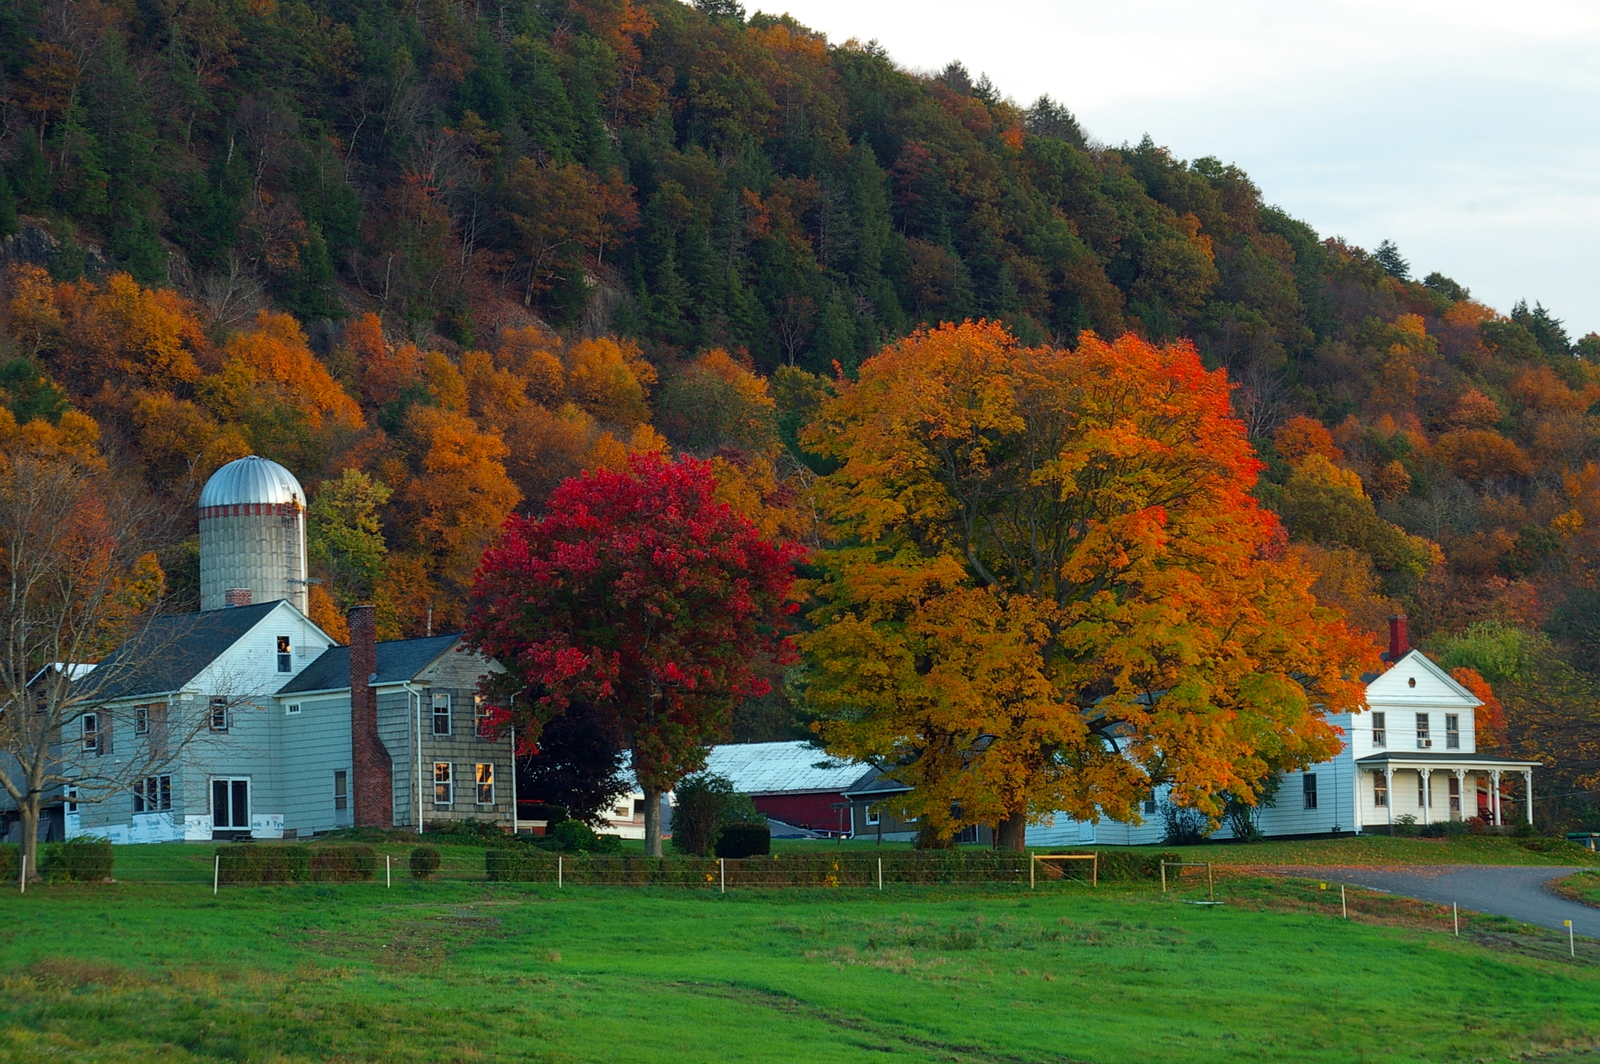 Farm in Fall Foliage (user submitted)